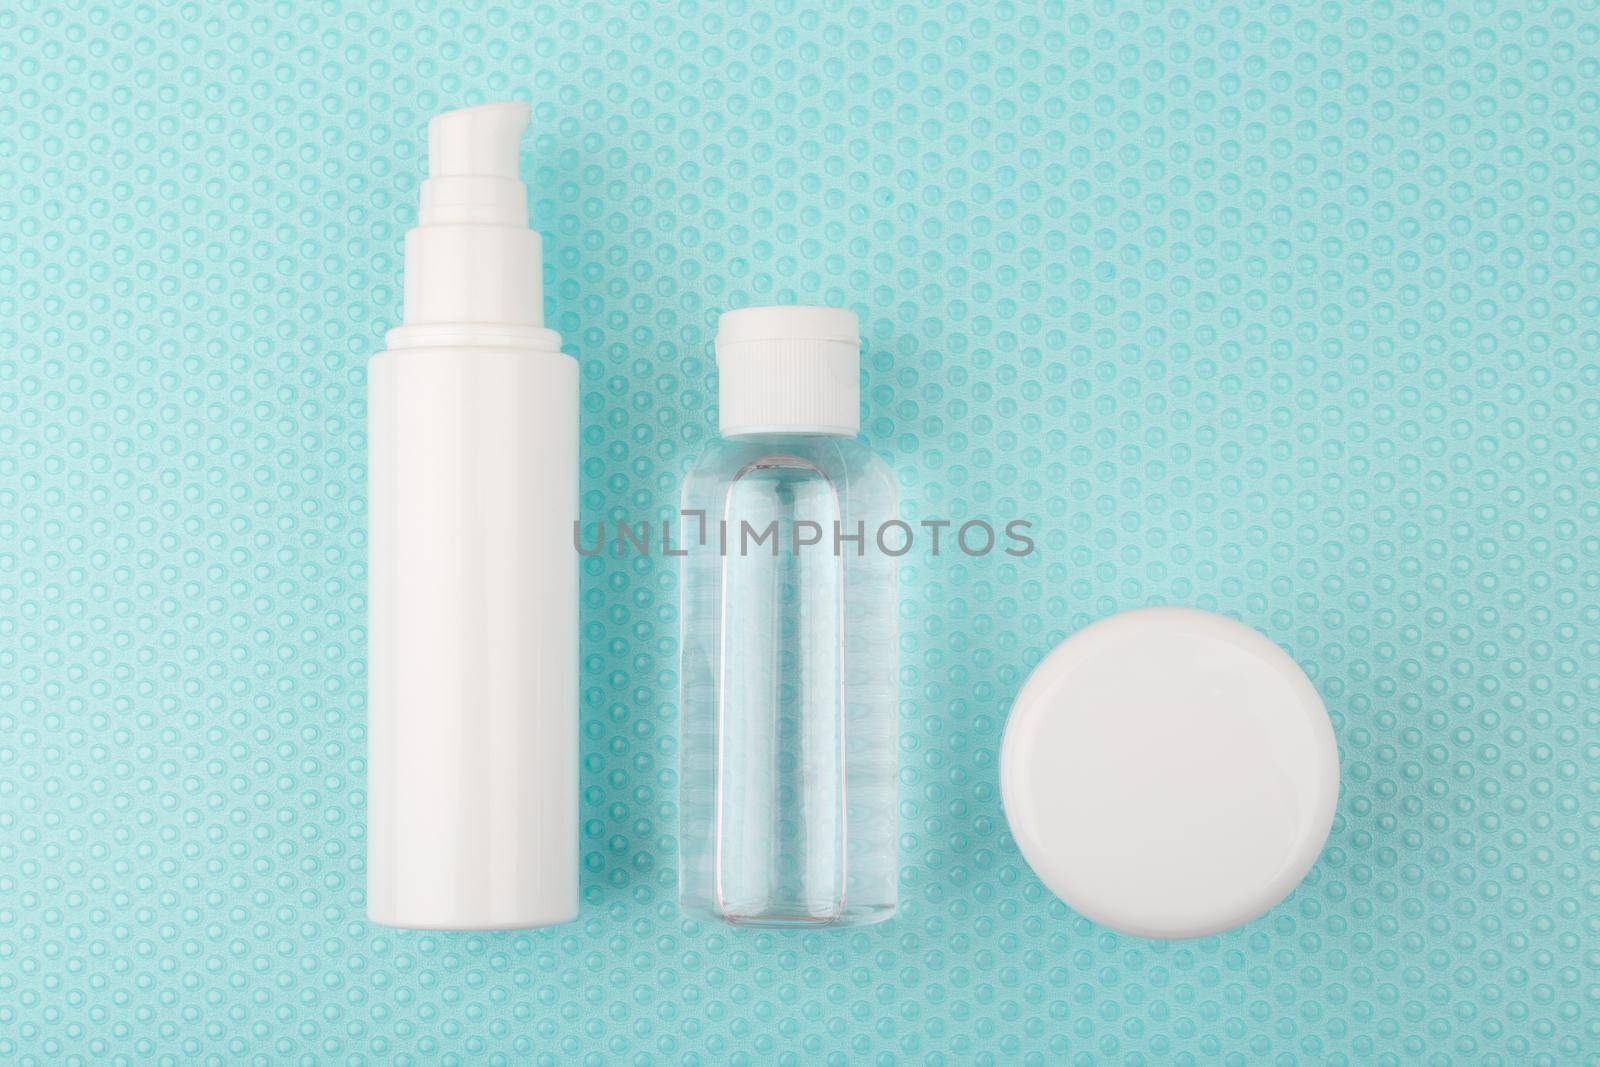 Toiletries on light blue background with bubbles. Face cream, lotion and under eye gel for skin care and beauty by Senorina_Irina